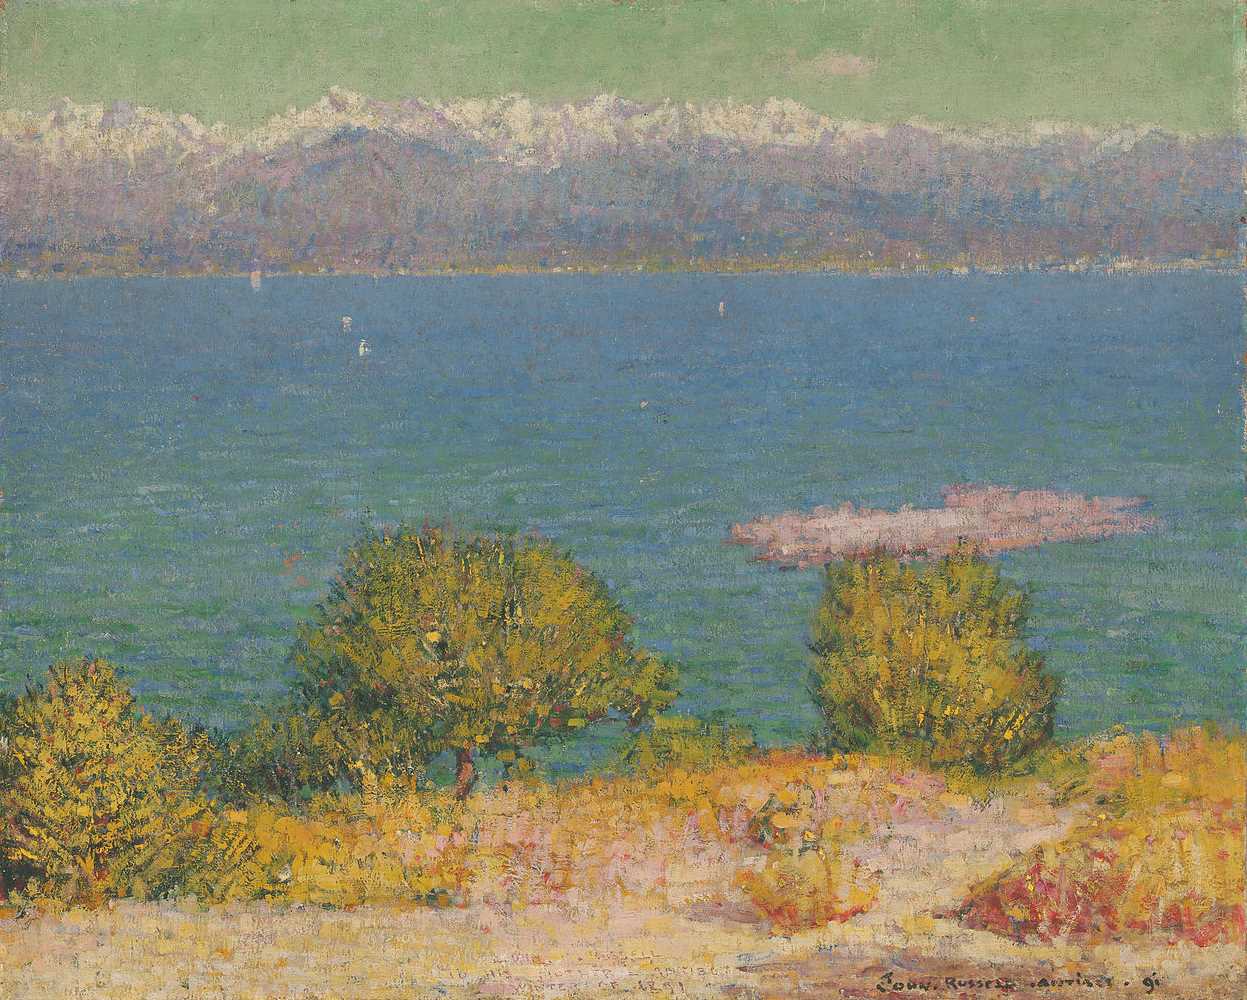 Landscape, Antibes The Bay of Nice - John Peter Russell